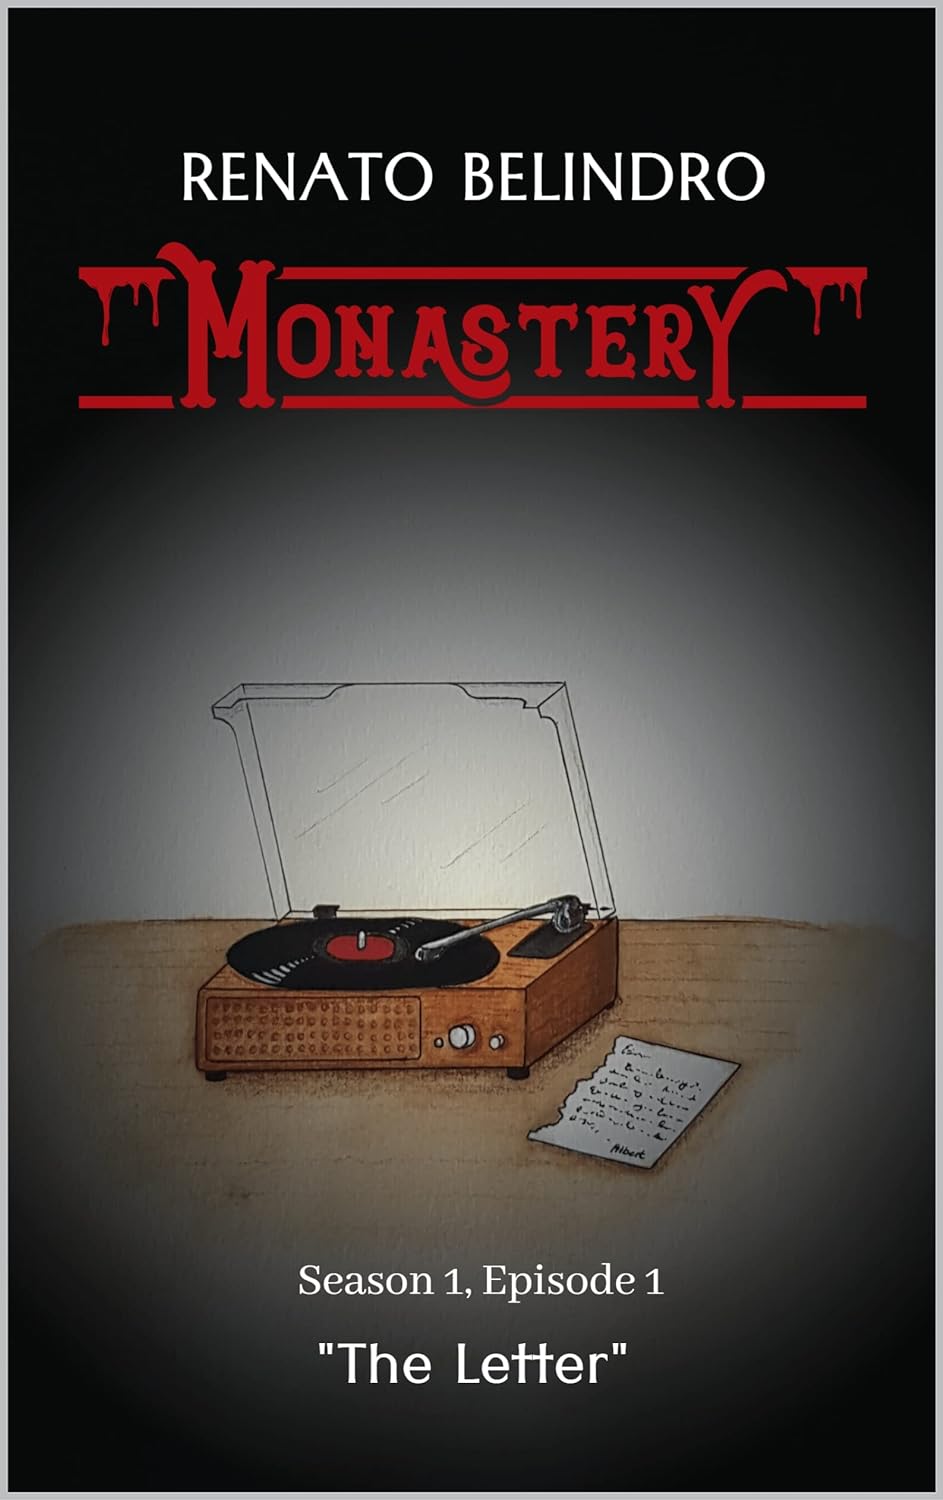 The book title is in huge red letters. A vinyl player is on what looks like a wooden surface.